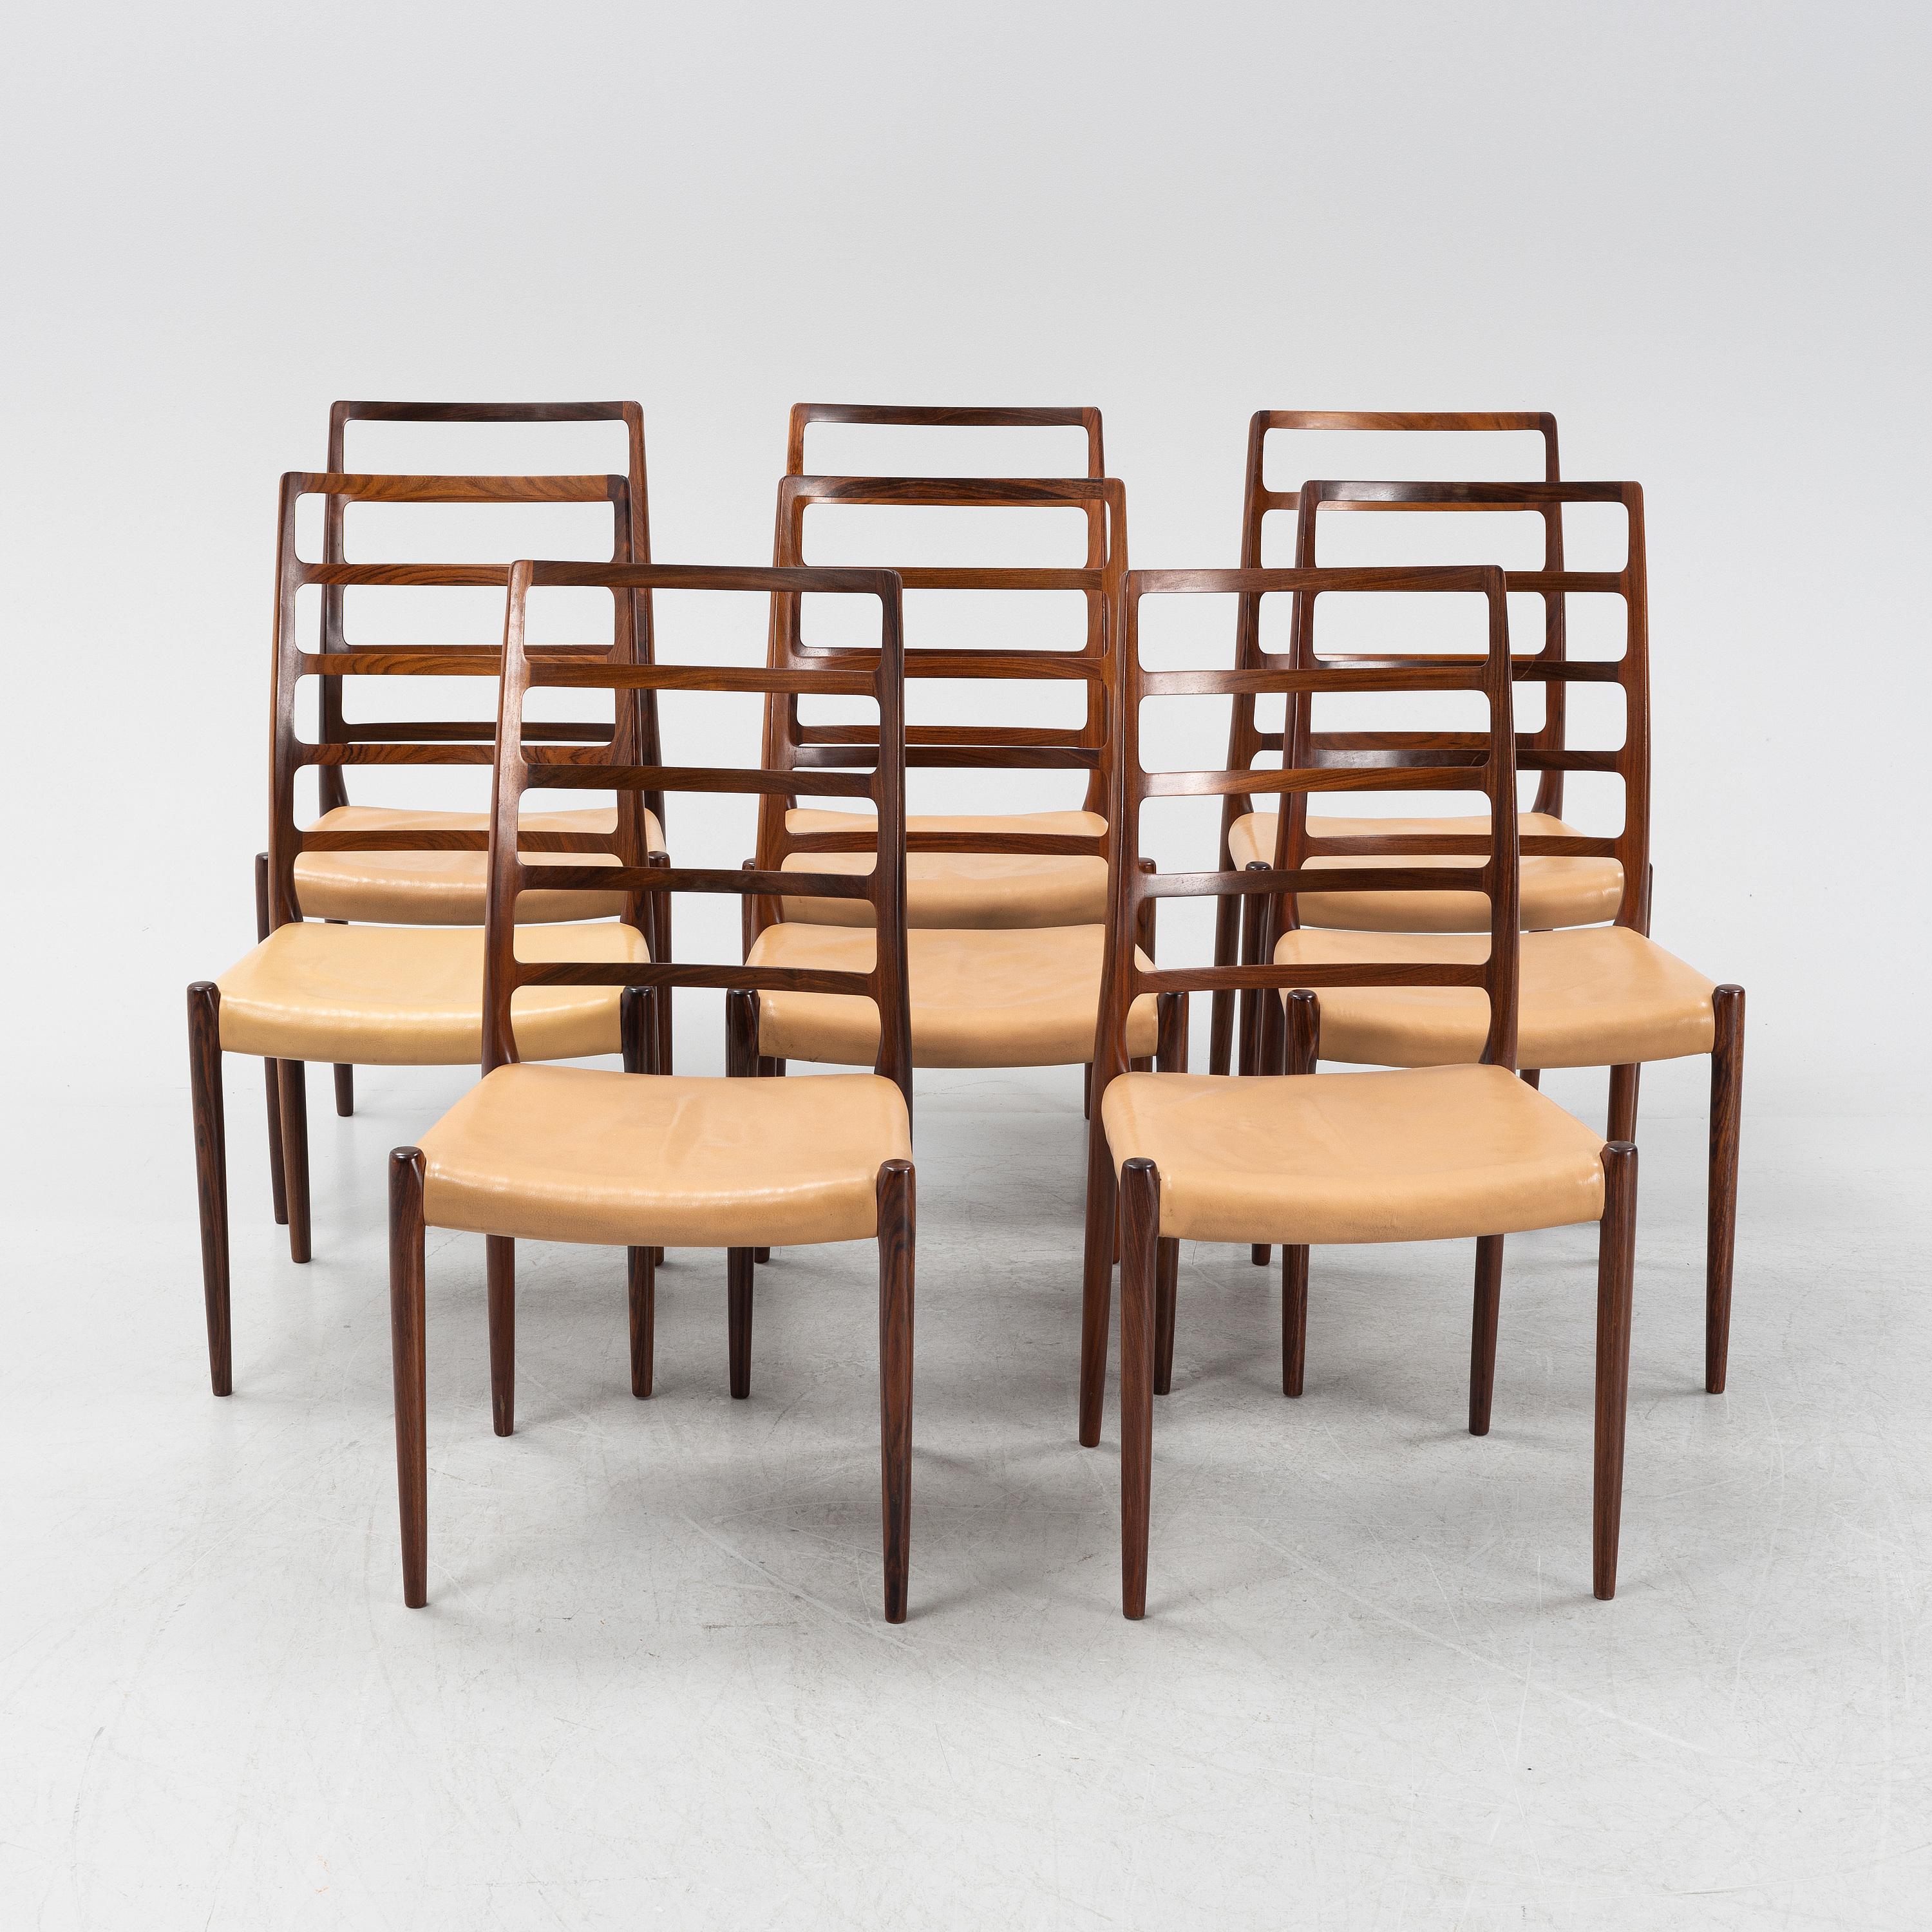 20th Century Neils Otto Moller Dining Chairs Mod 82, Set of 8 in Rosewood Denmark 1960